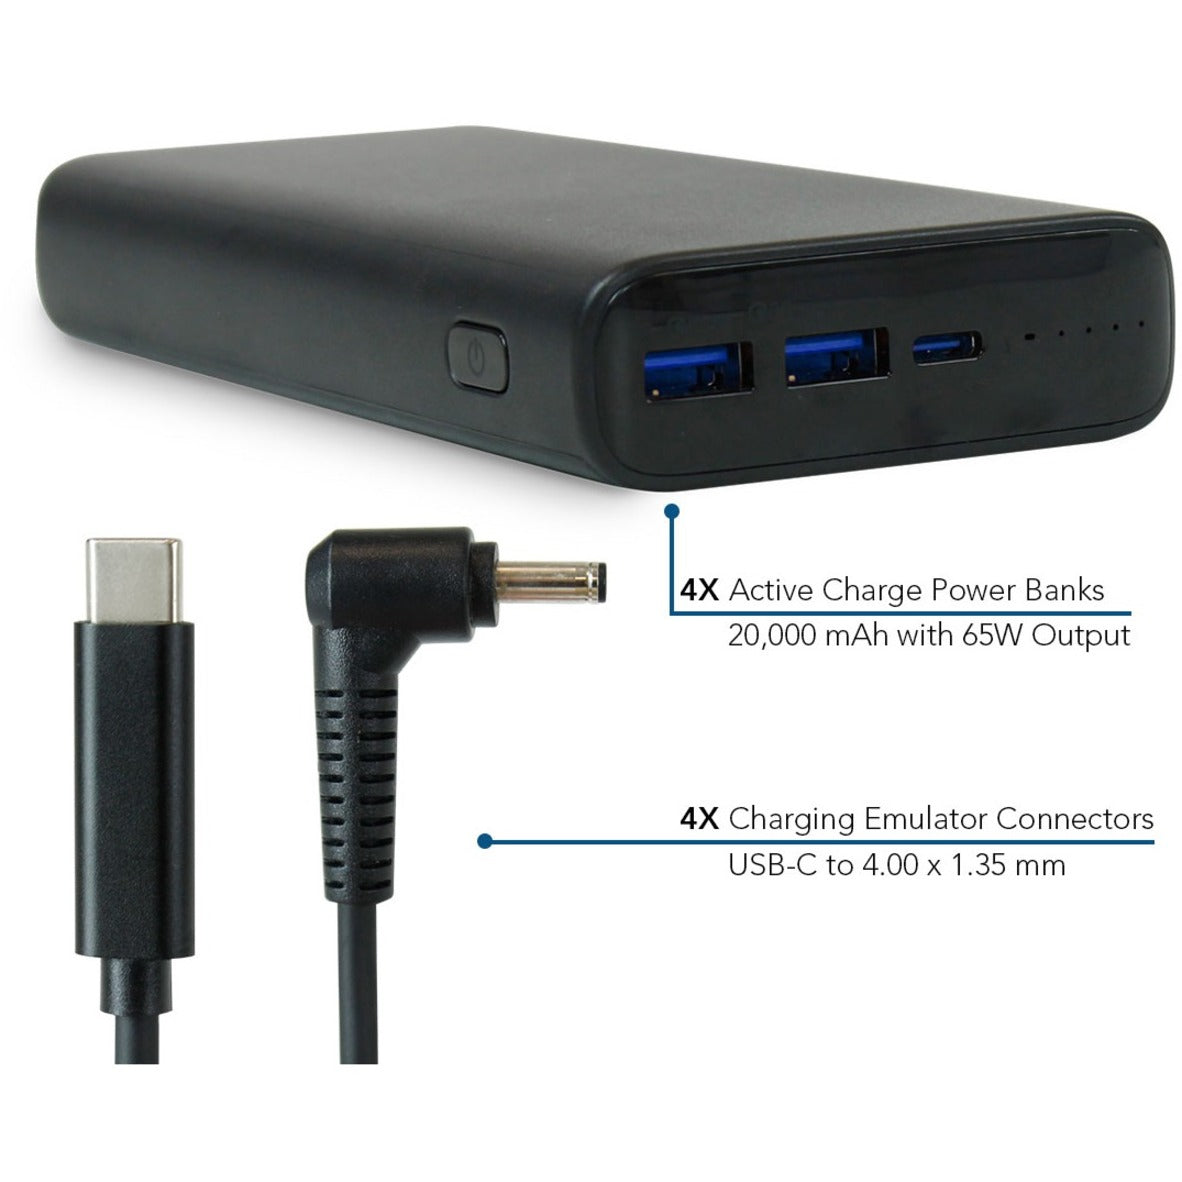 JAR Systems PBC20 Active Charge Power Bank 4-Pack with Asus Connectors, 20000mAh Battery Capacity